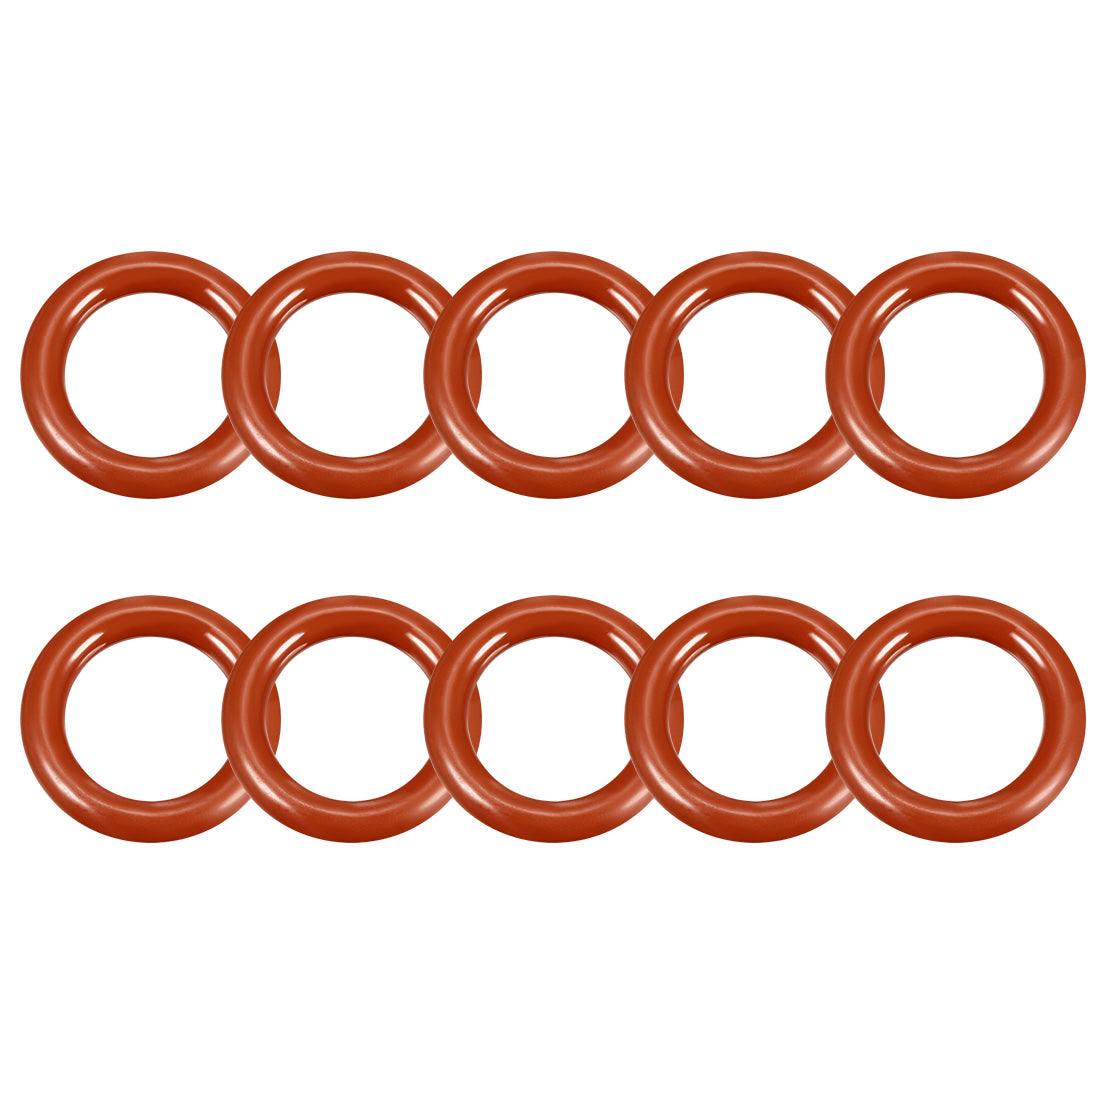 uxcell Uxcell Silicone O-Ring VMQ Seal Rings Sealing Gasket Red